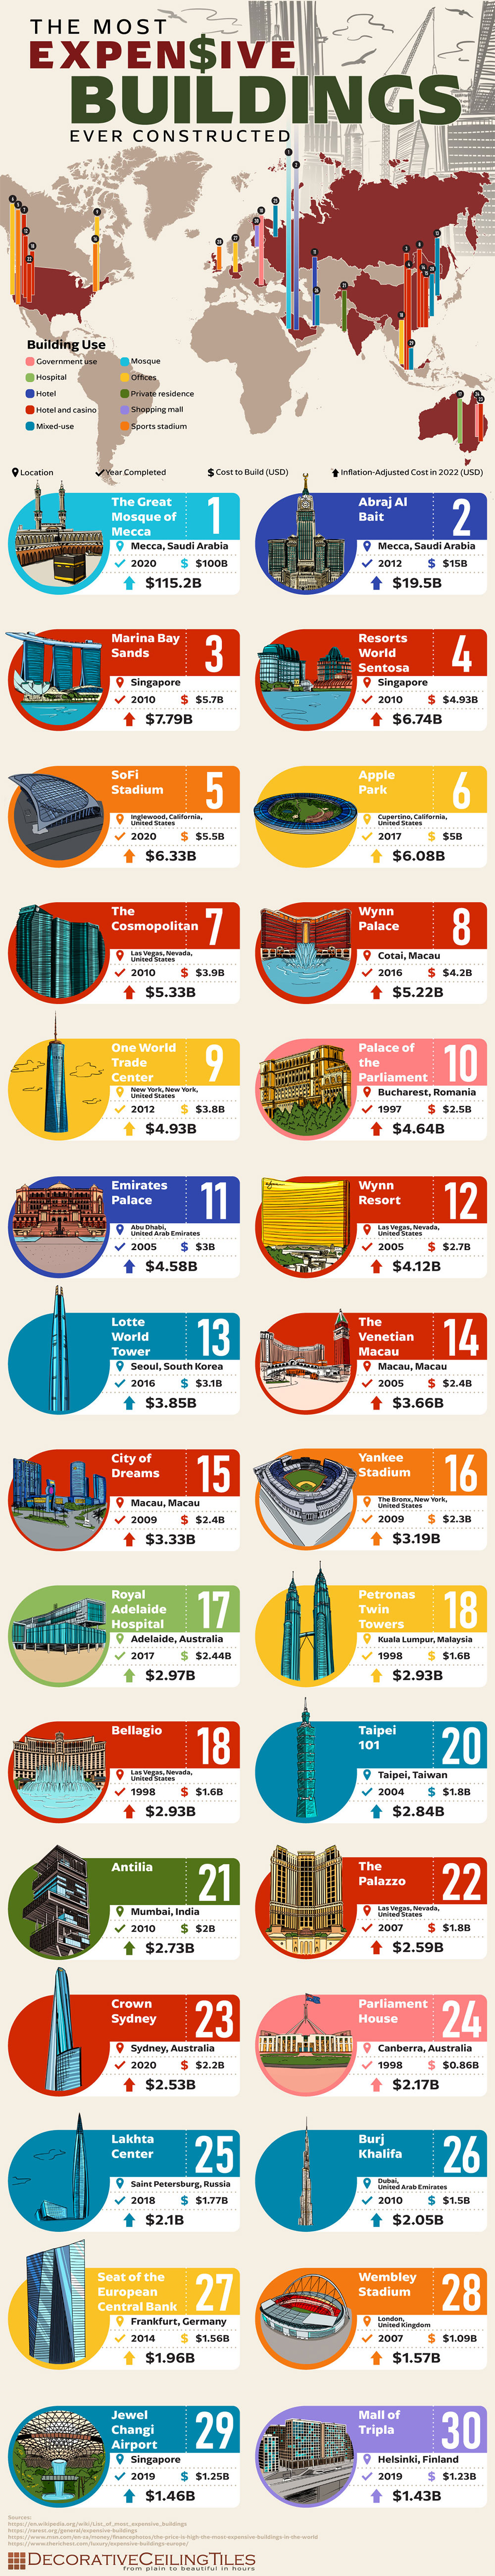 The Most Expensive Buildings Ever Constructed - DecorativeCeilingTiles.net - Infographic